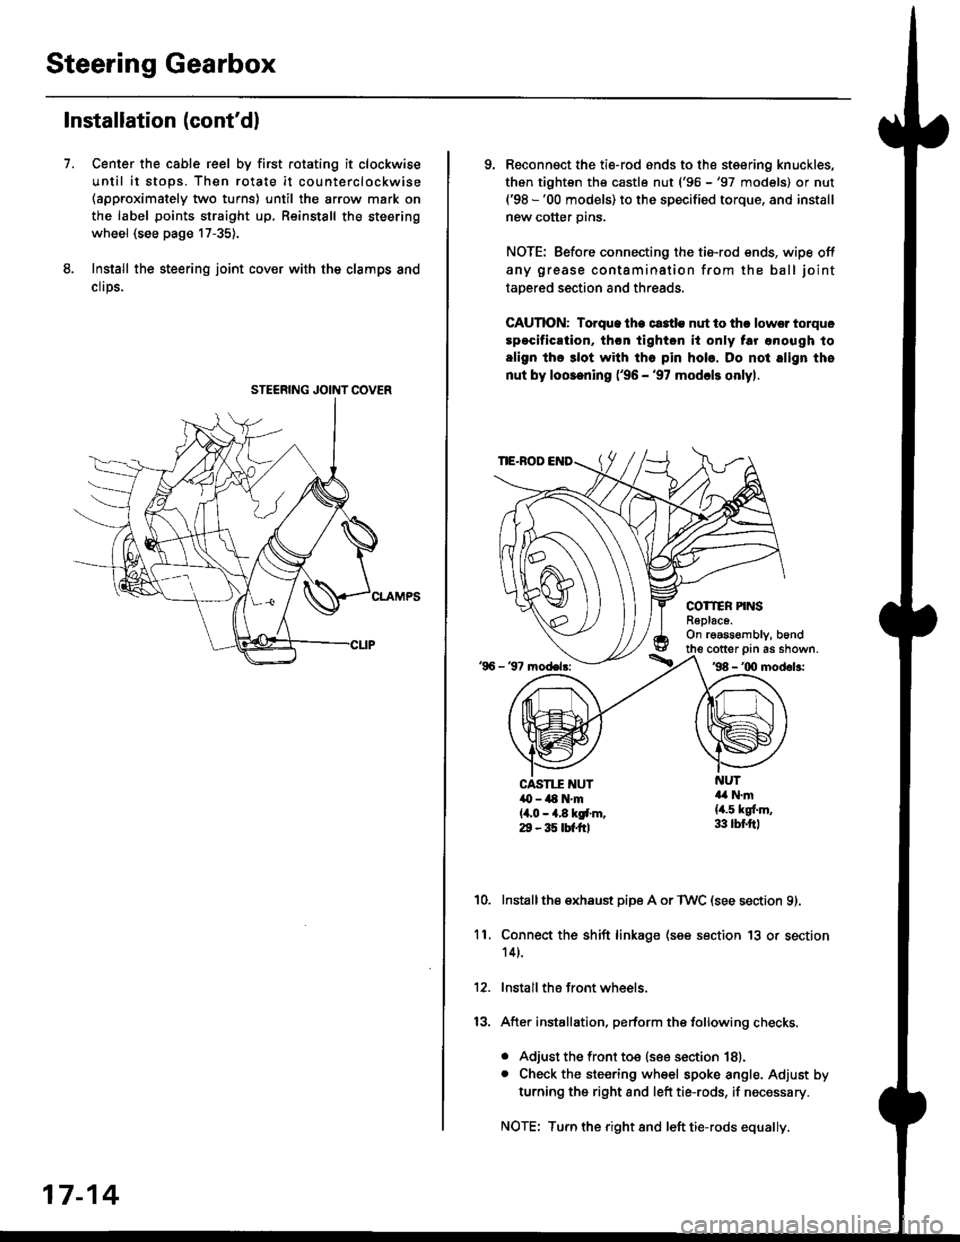 HONDA CIVIC 2000 6.G Owners Guide Steering Gearbox
Installation (contdl
Center the cable reel by first rotating it clockwise
until it stops. Then rotate it counterclockwise(approximately two turns) until the arrow mark on
the label p